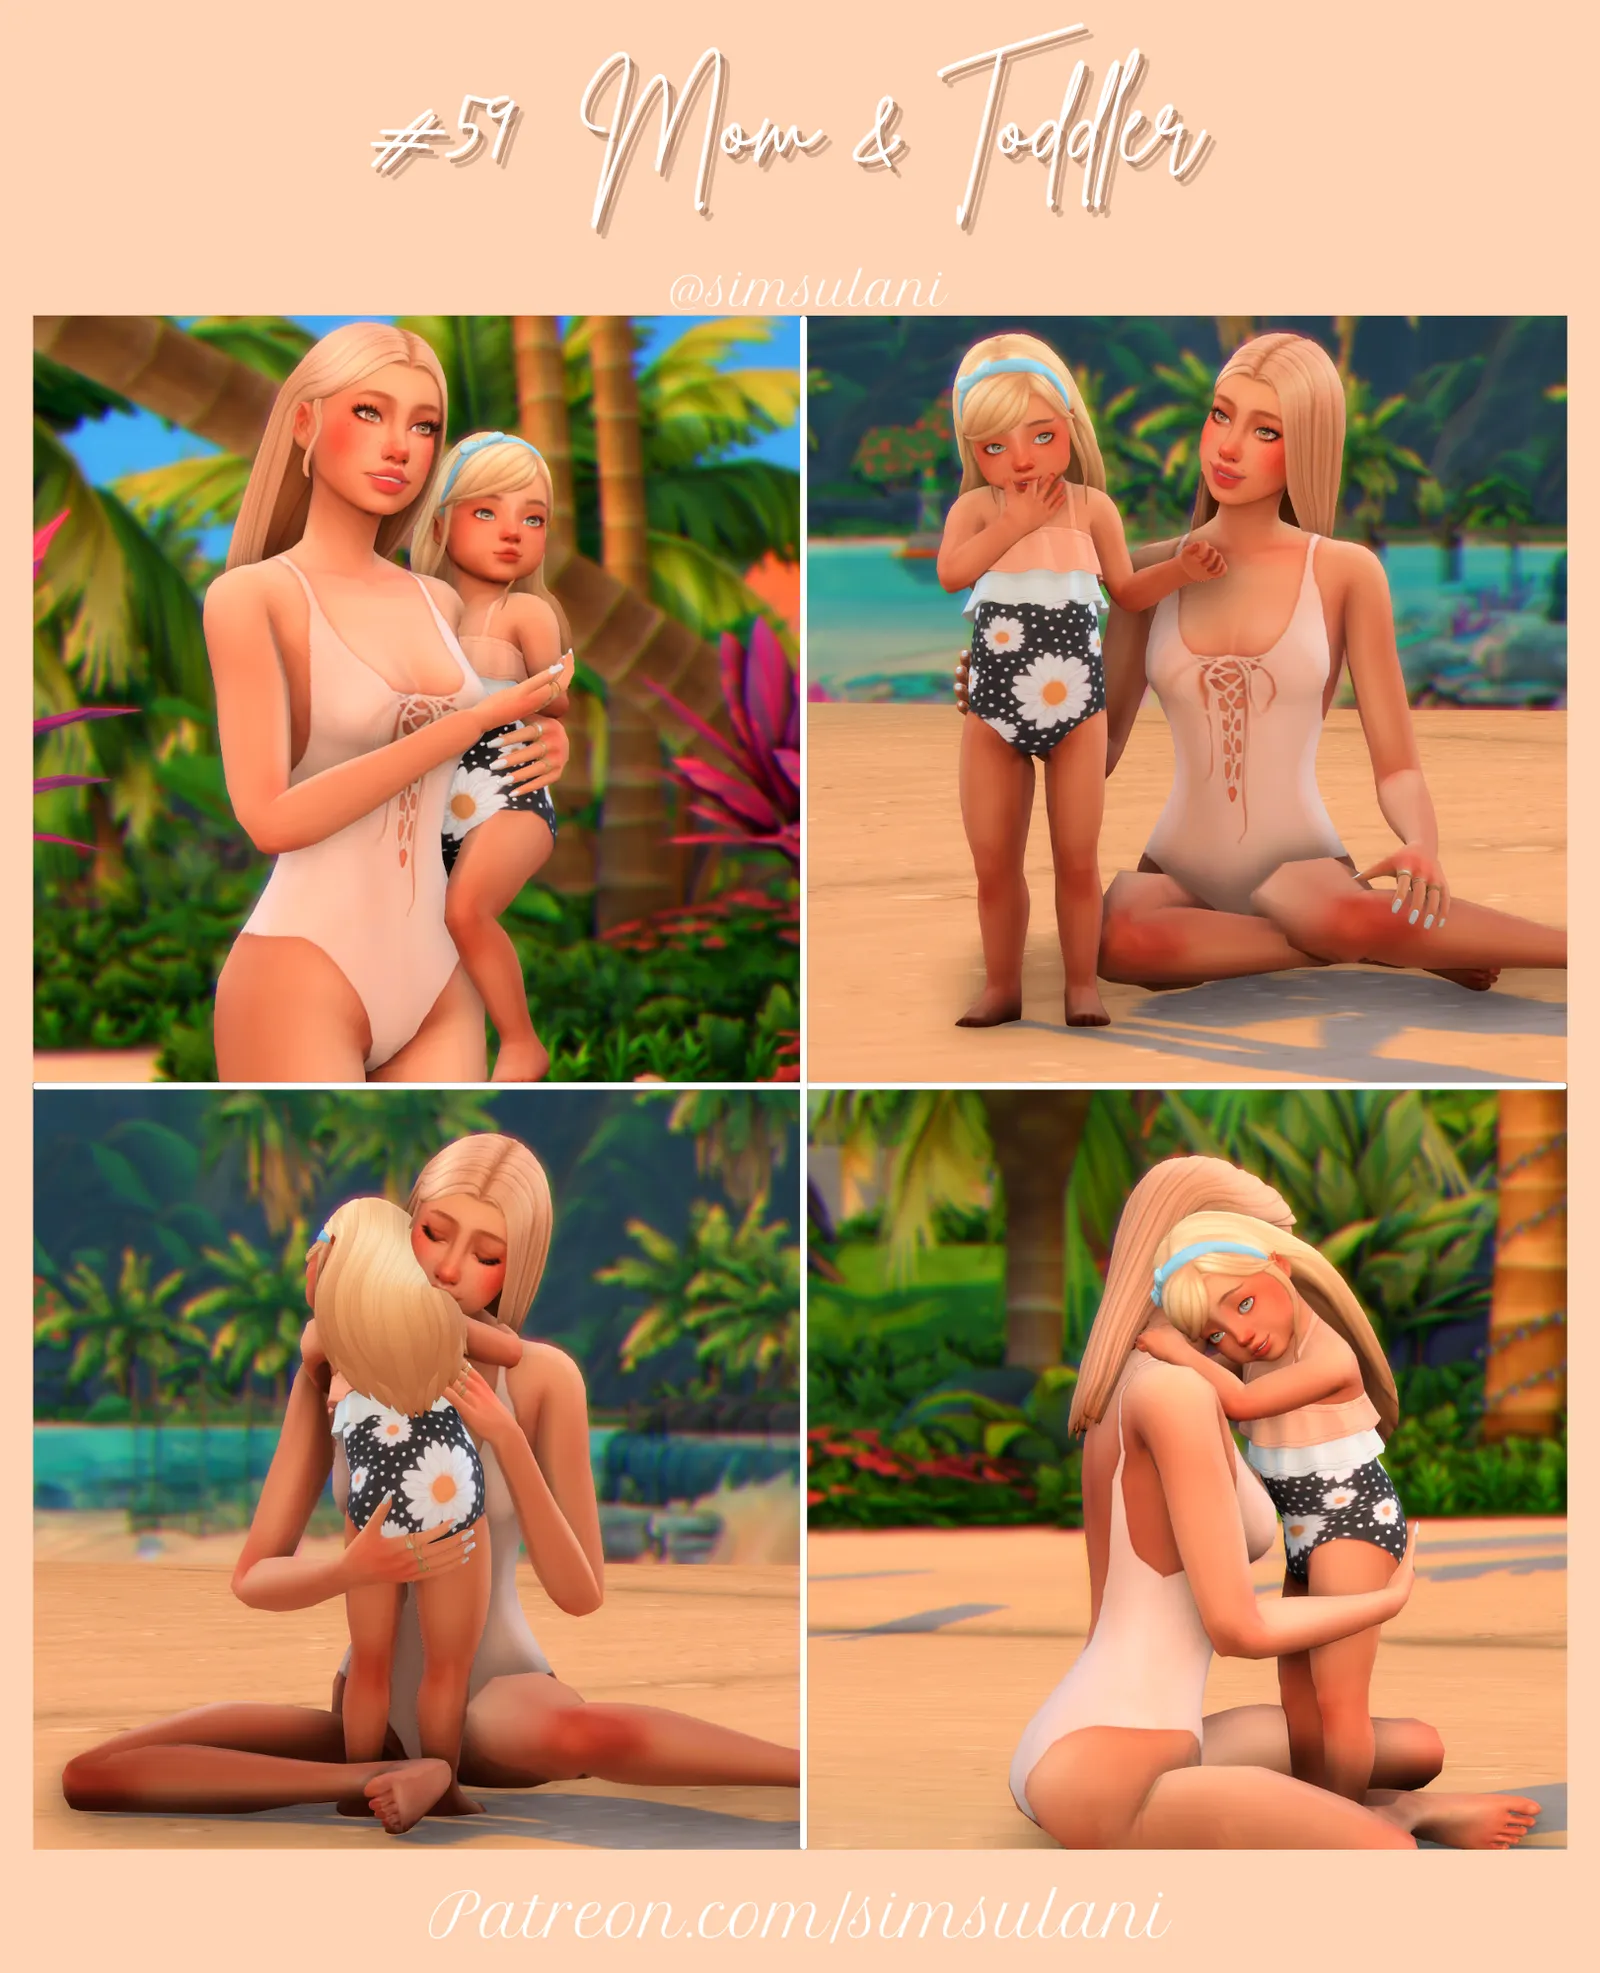 #59 Poses Pack "Mom & Toddler"